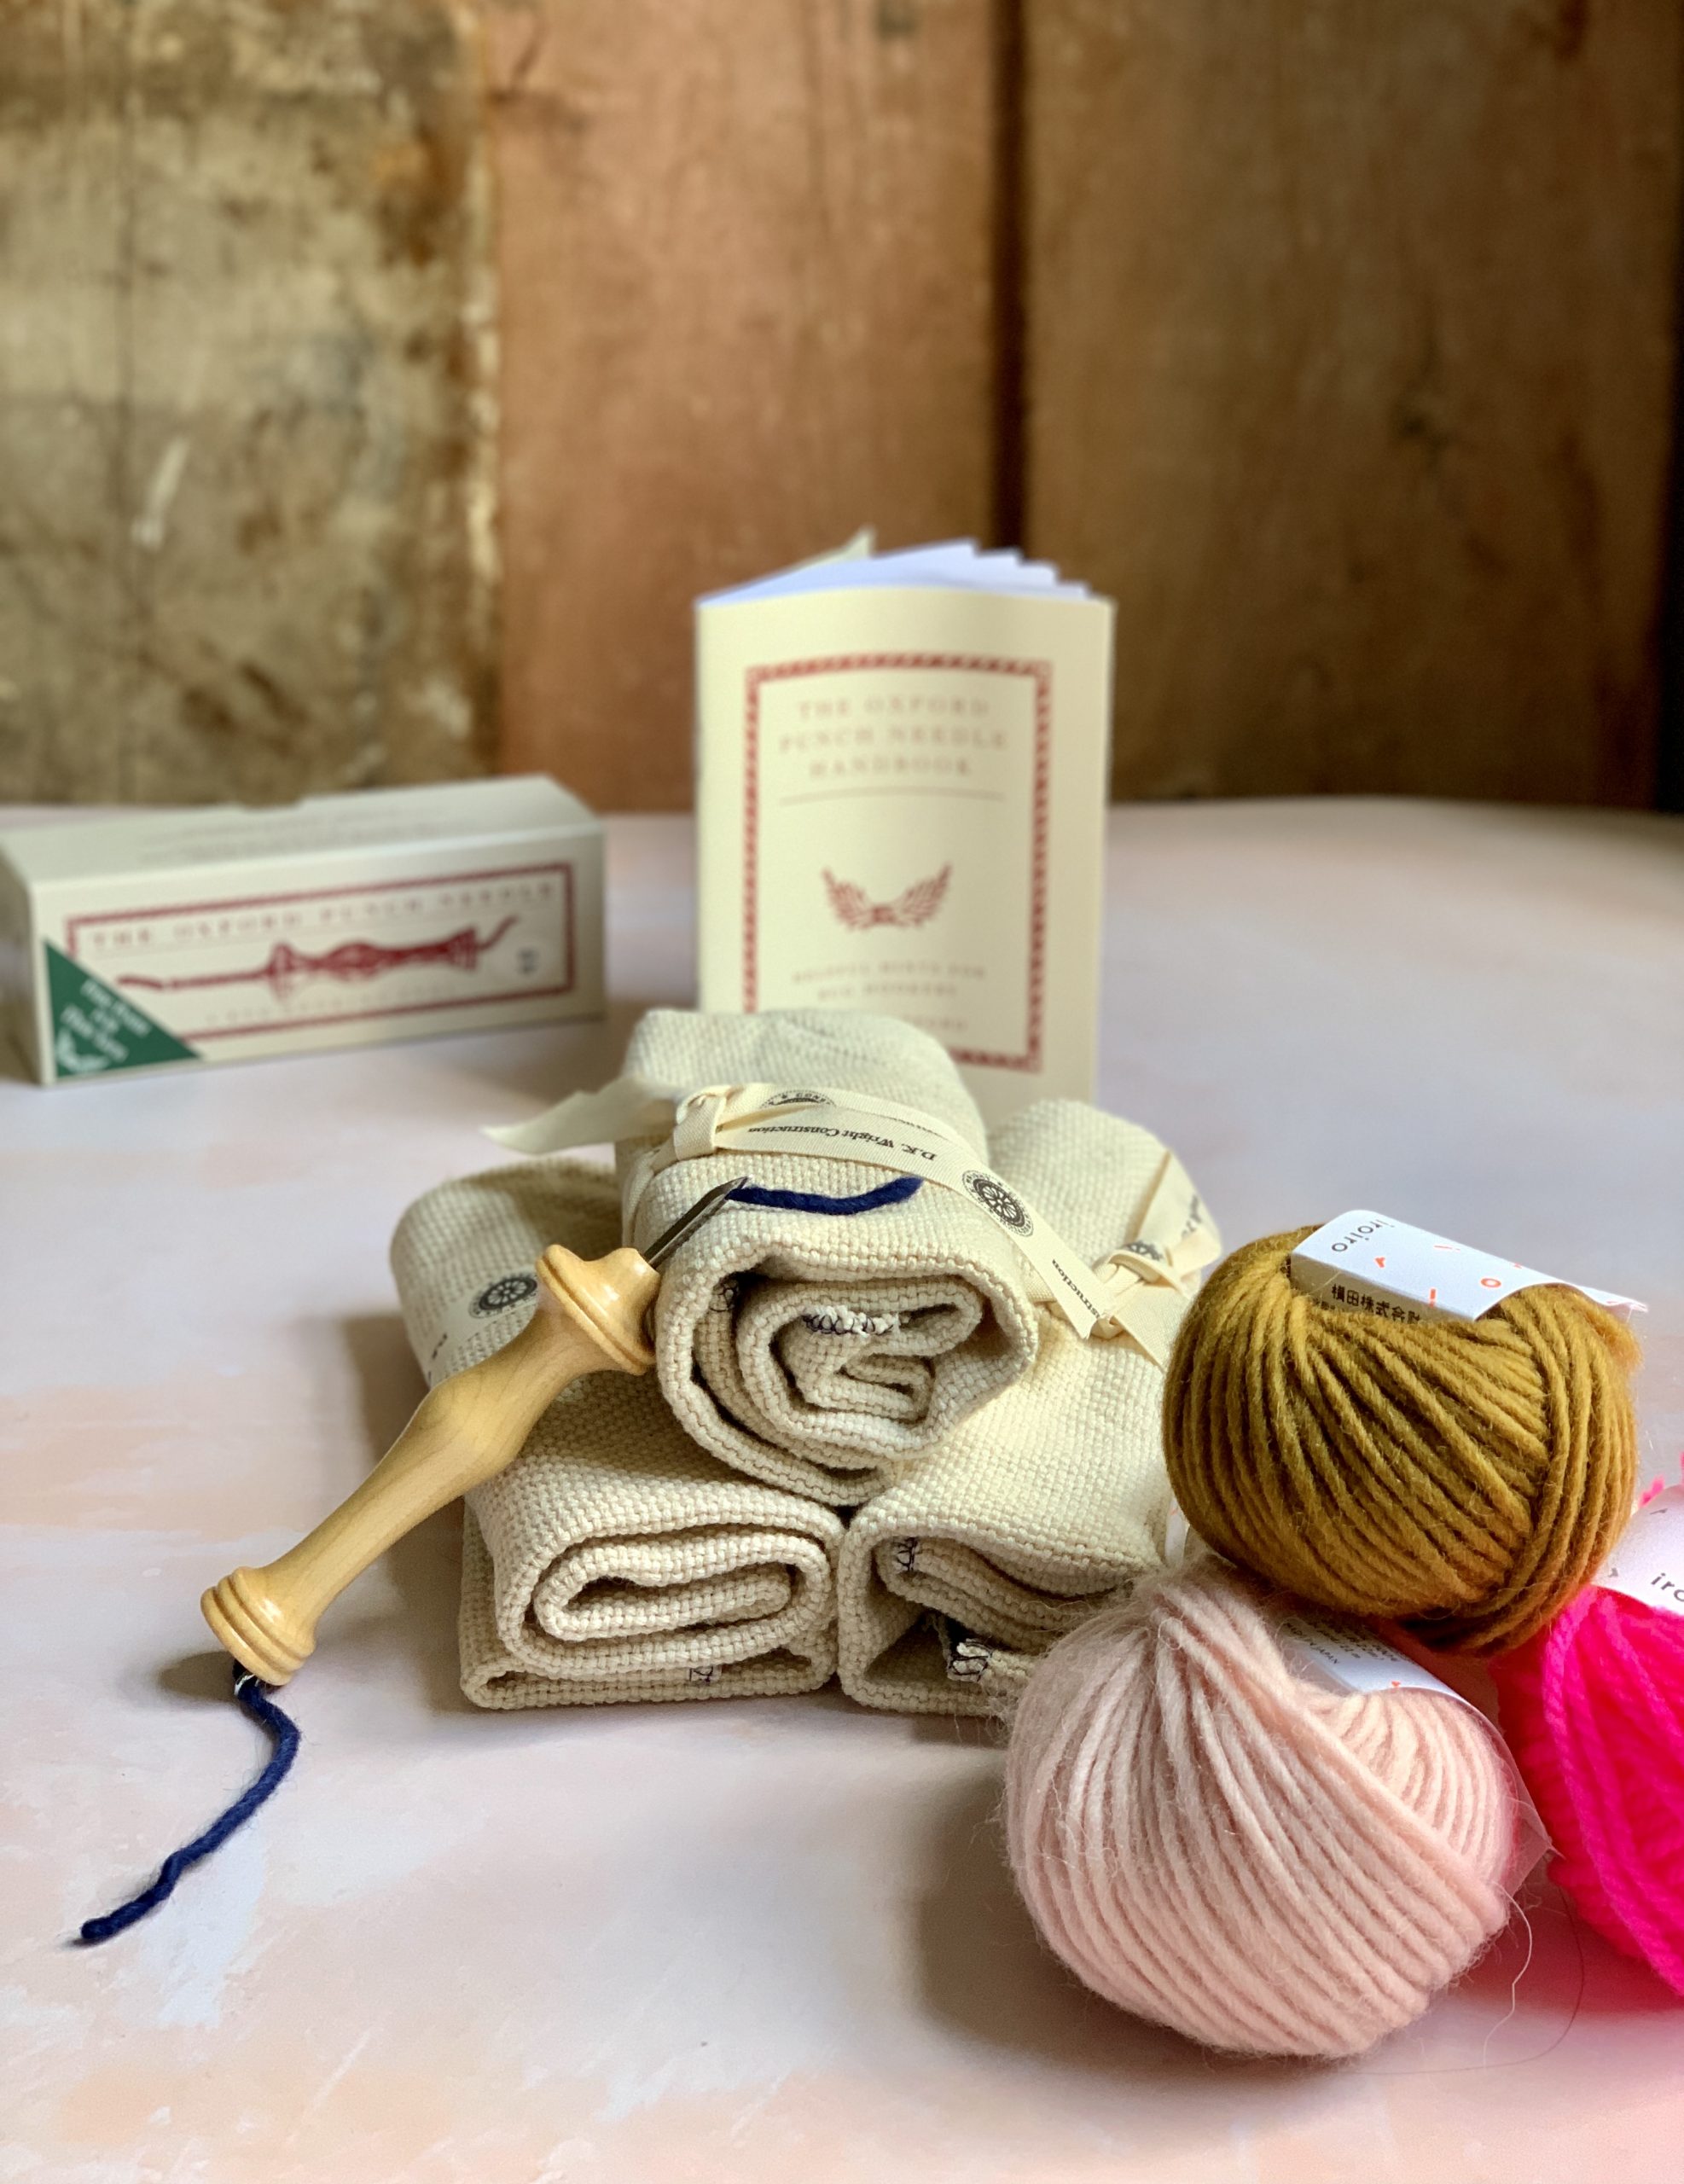 Packing a punch with a new punch needle workshop, yarn and giveaway!